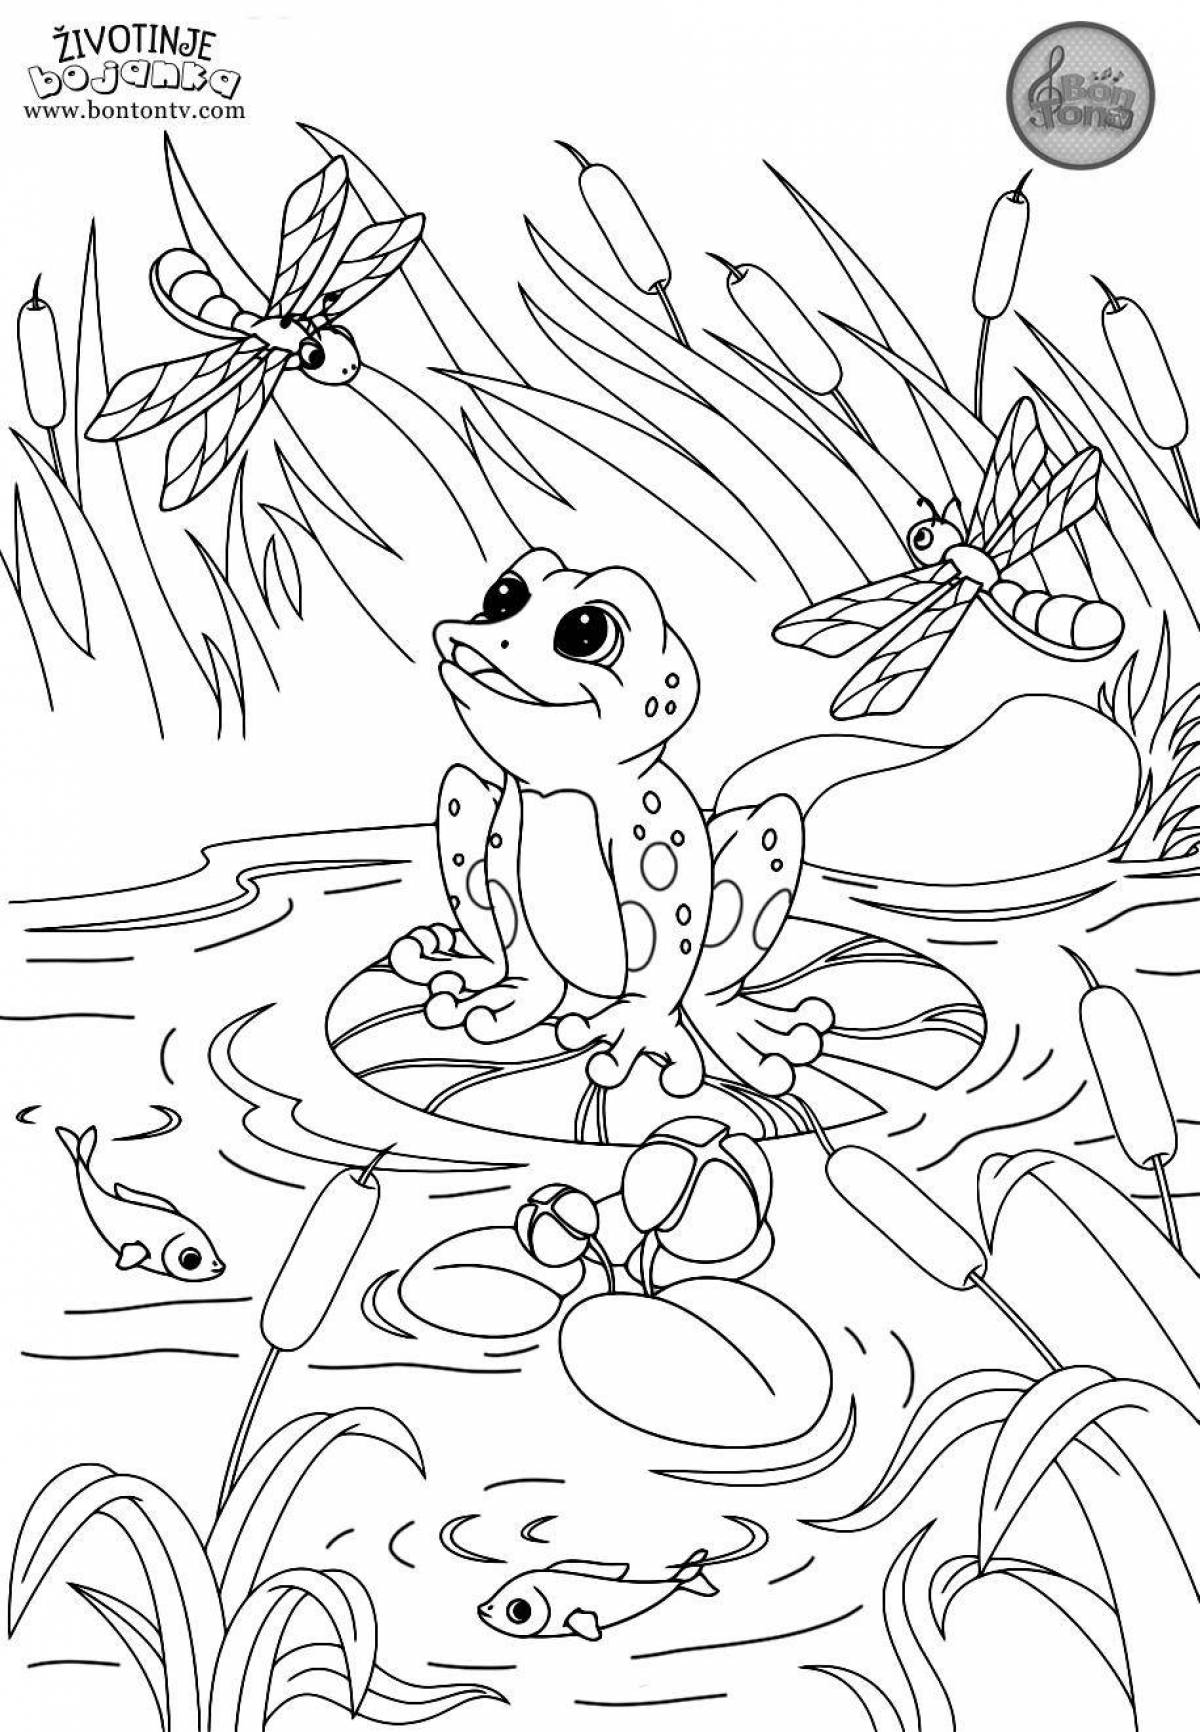 Coloring book animated frog traveler